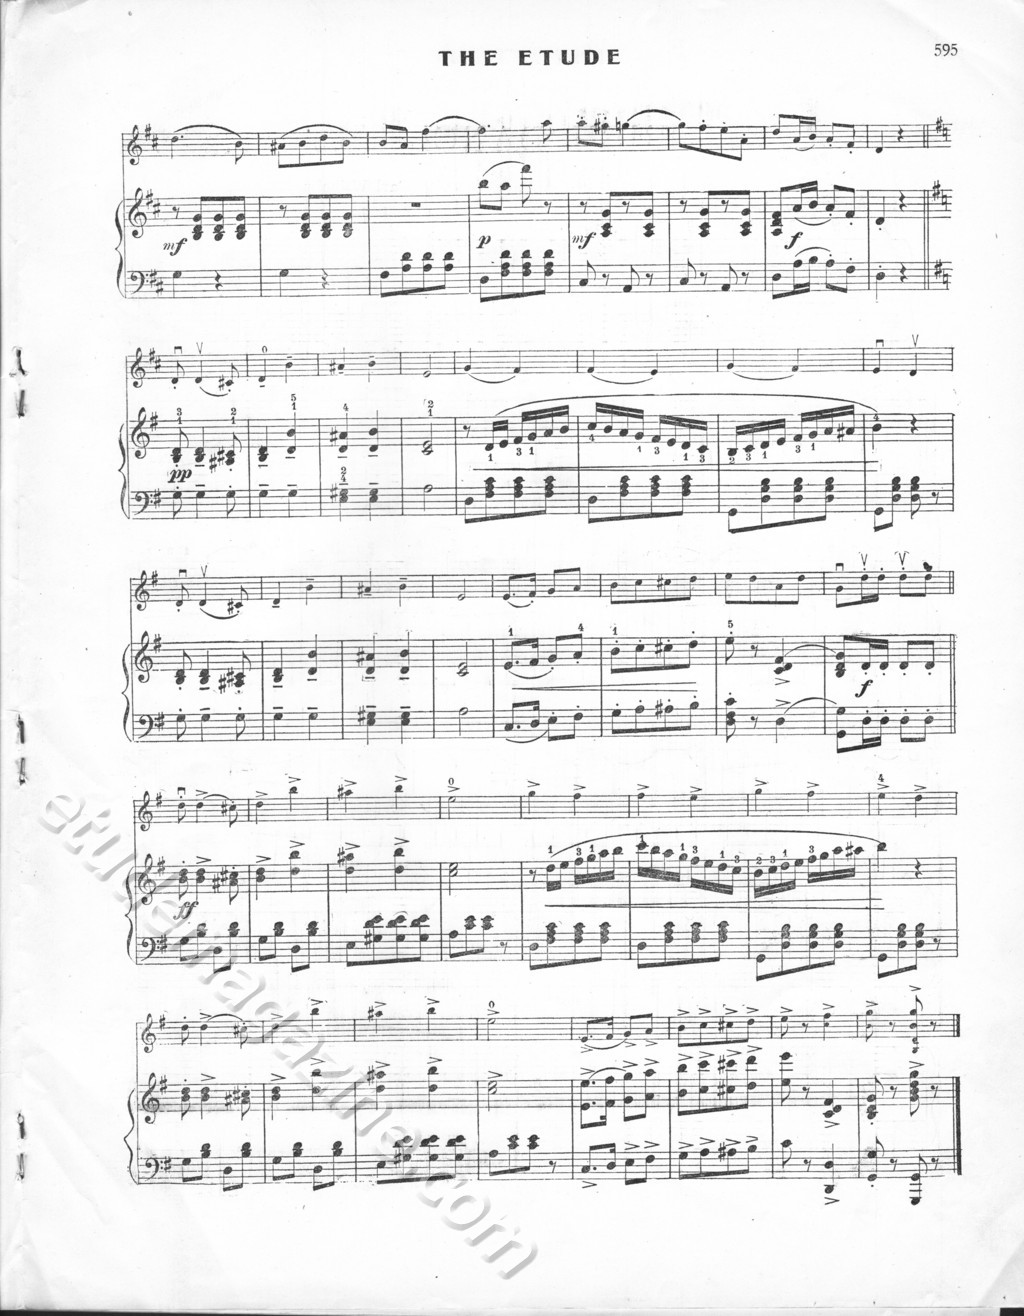 Off For The Front (March). F.A. Franklin, Op. 40, No. 1